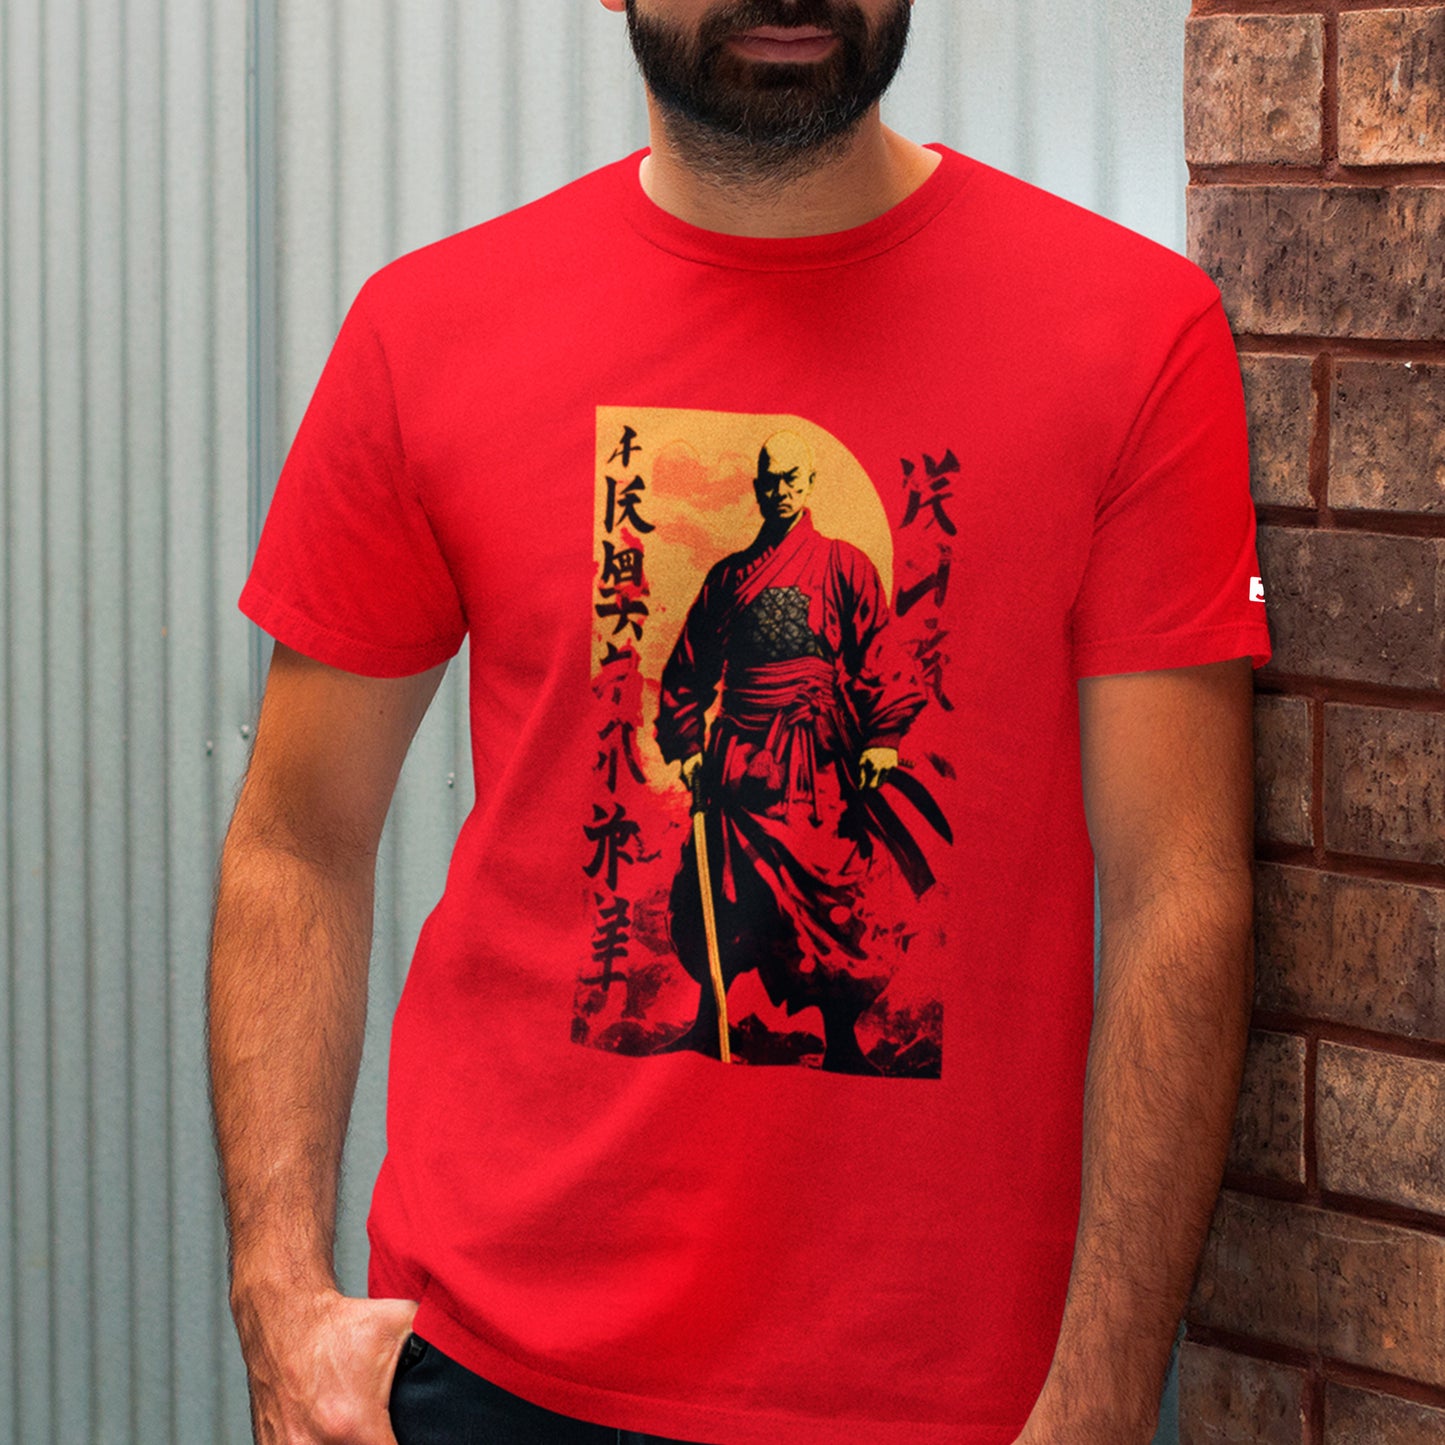 Imperial Honour Unisex t-shirt, worn by model outdoors